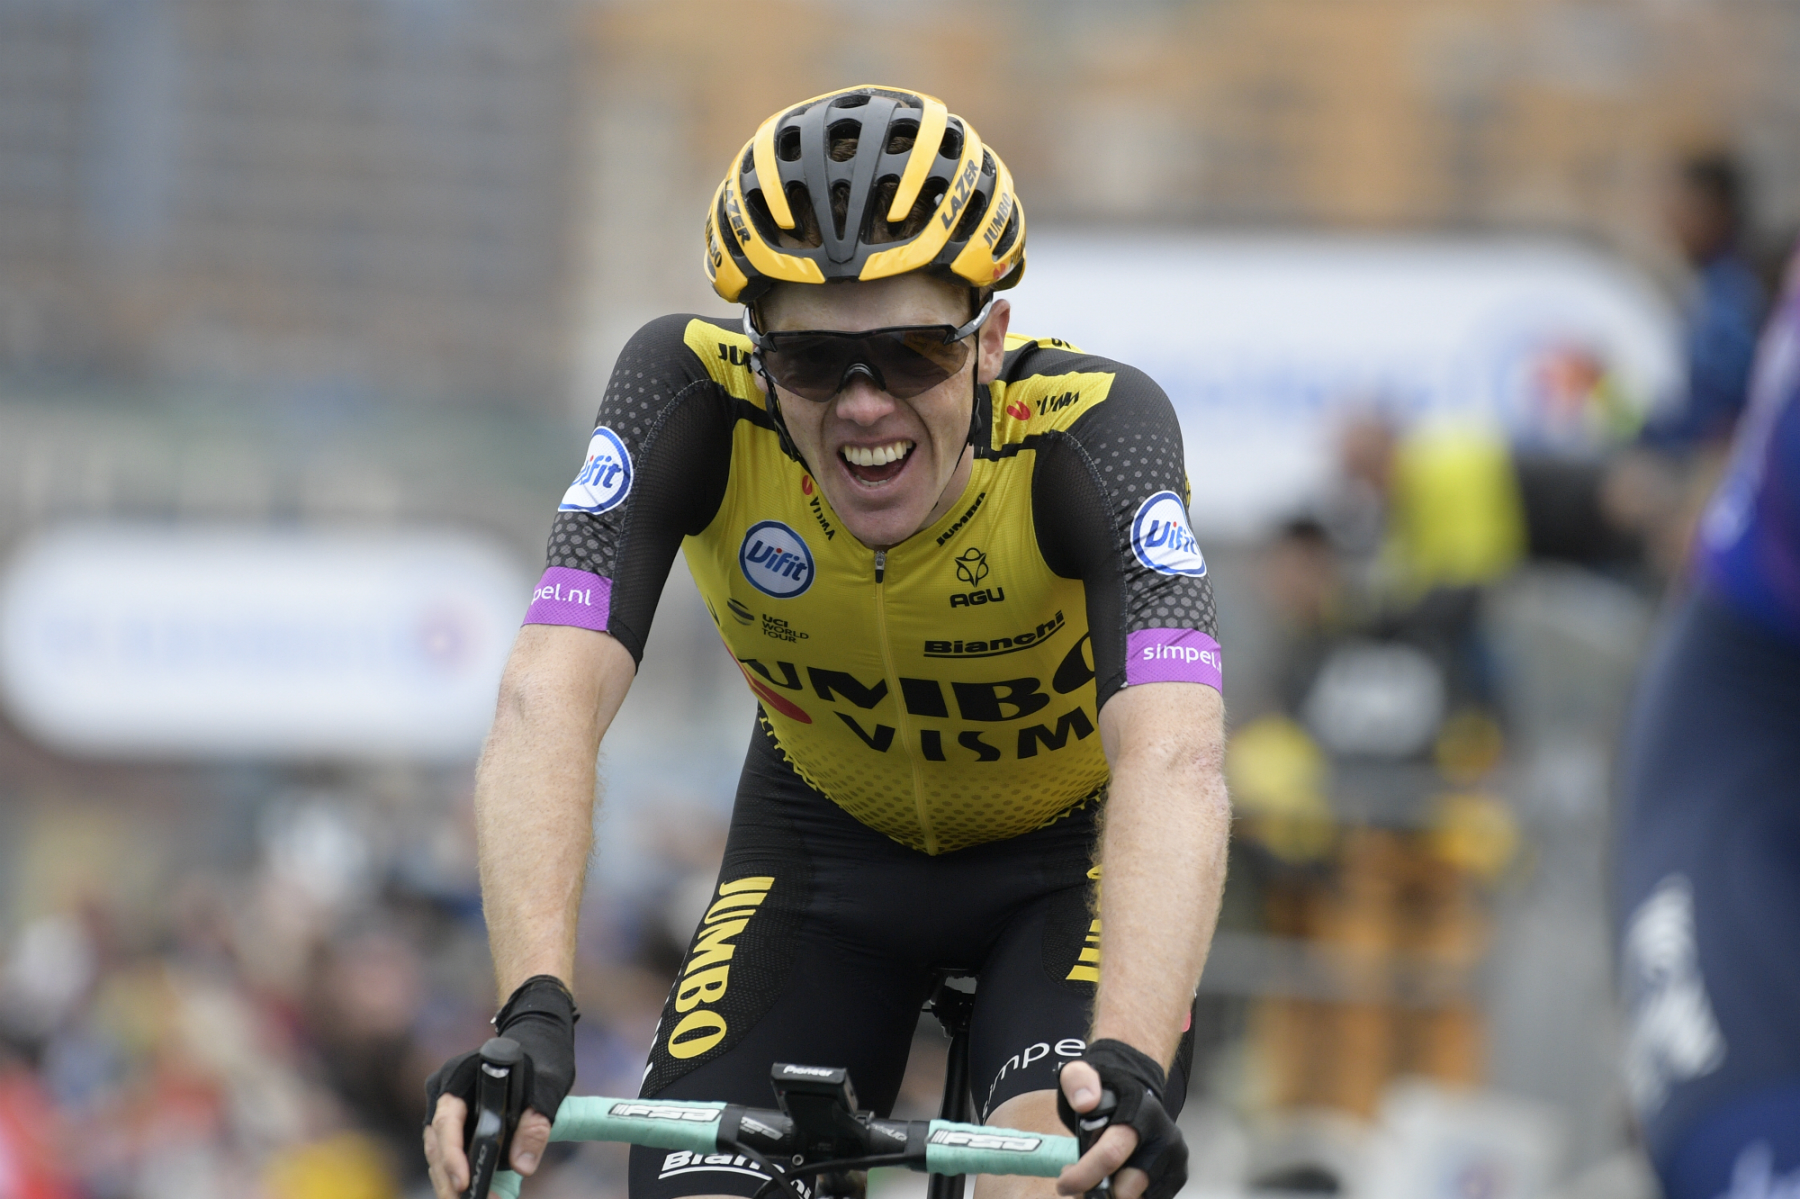 Dutch rider Steven Kruijswijk on Stage 20 of the 2019 Tour de France, which he finished in third place.